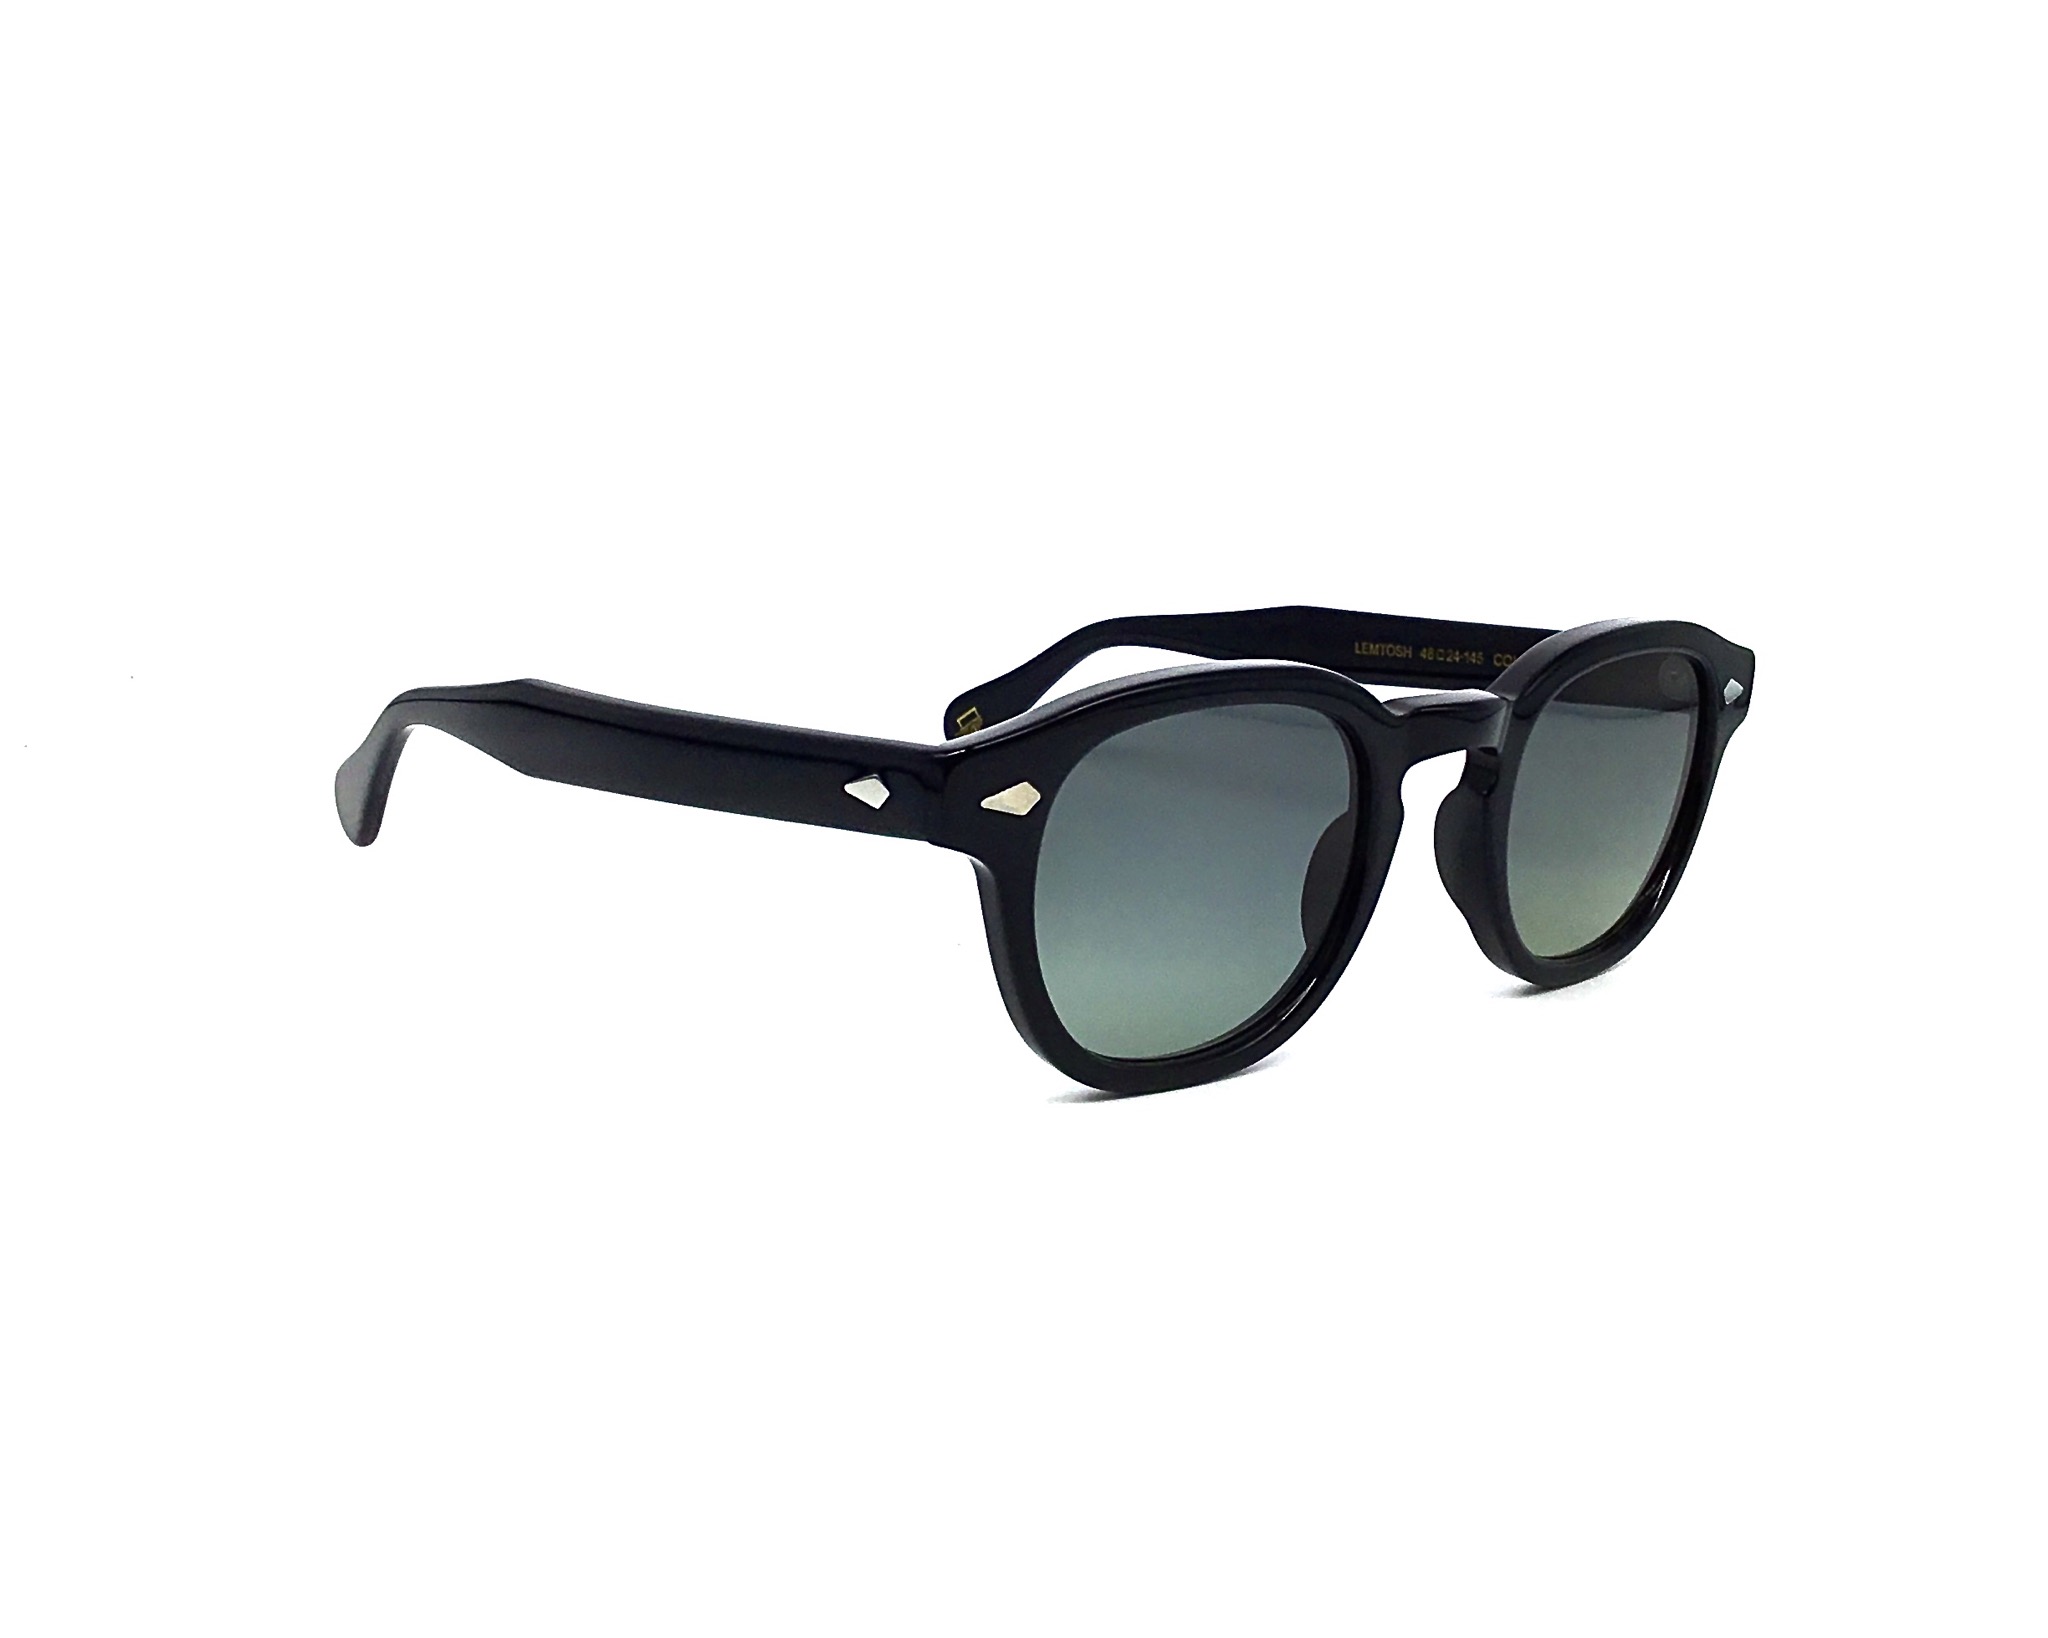 Moscot Sun Lemtosh forest wood | Sunglasses and Eyeglasses Online SHOP ...